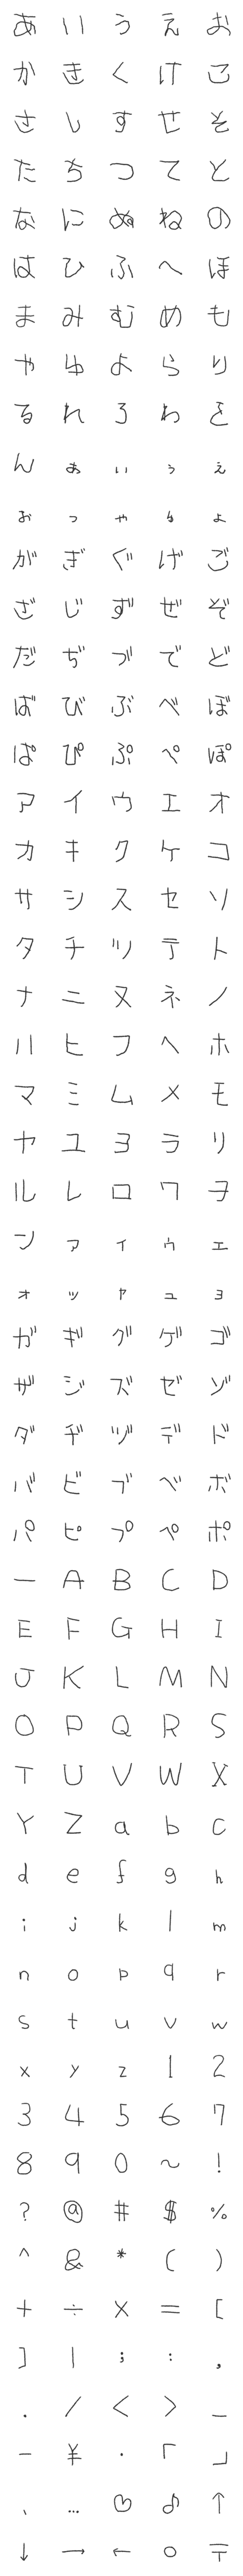 [LINE絵文字]子供タッチのえんぴつ文字の画像一覧